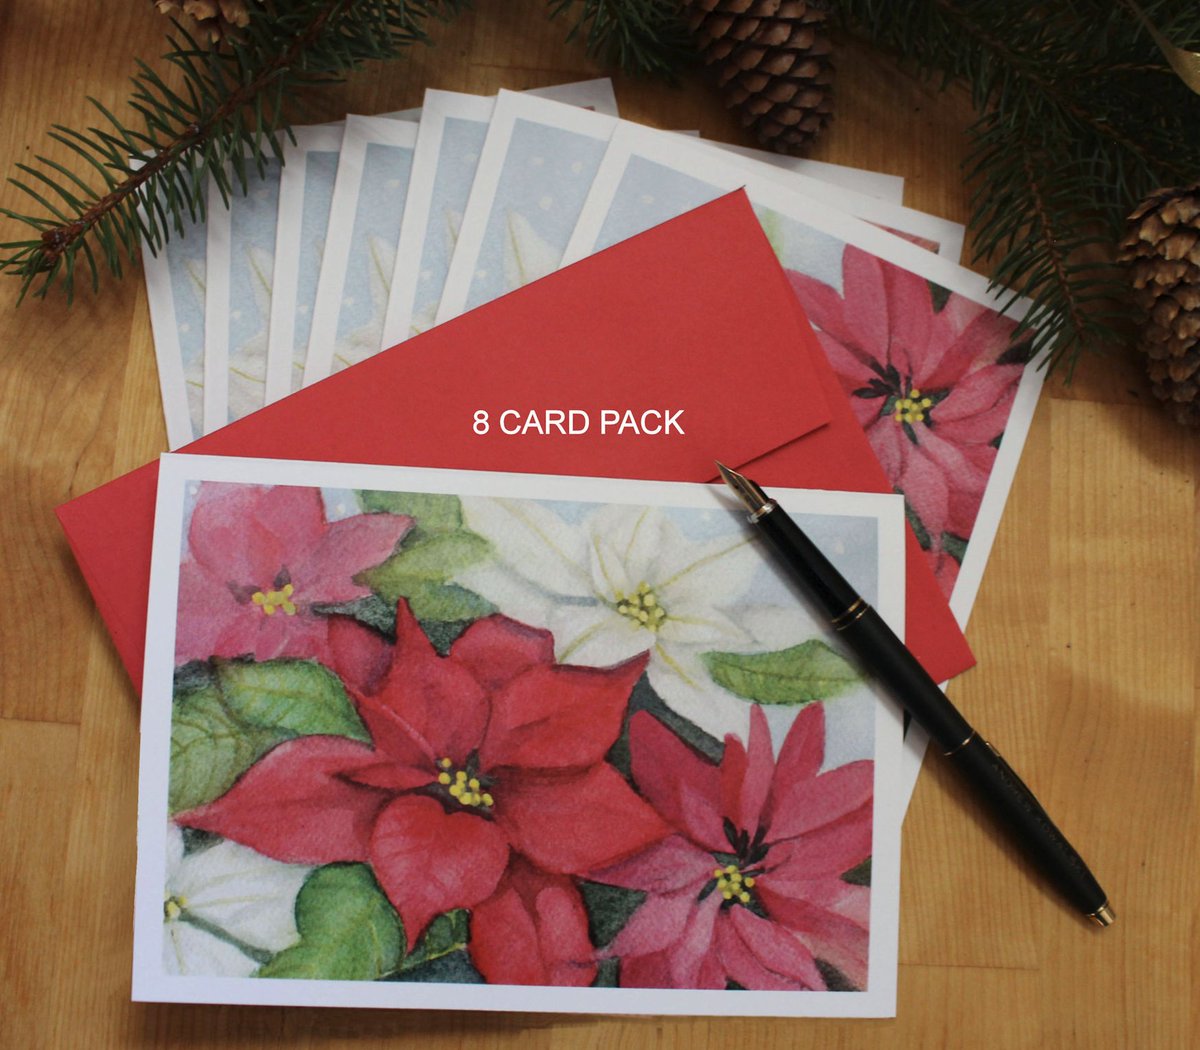 Floral Christmas Cards #red #poinsettia #Flowers #floralart #watercolor #artcards #cards #christmascards #holidaycards #mail #letters #momlife #happyholidays #MerryChristmas #shopsmall #supportsmallbusiness #SMILEtt23 #goimagine 

goimagine.com/sycamorewoodst…